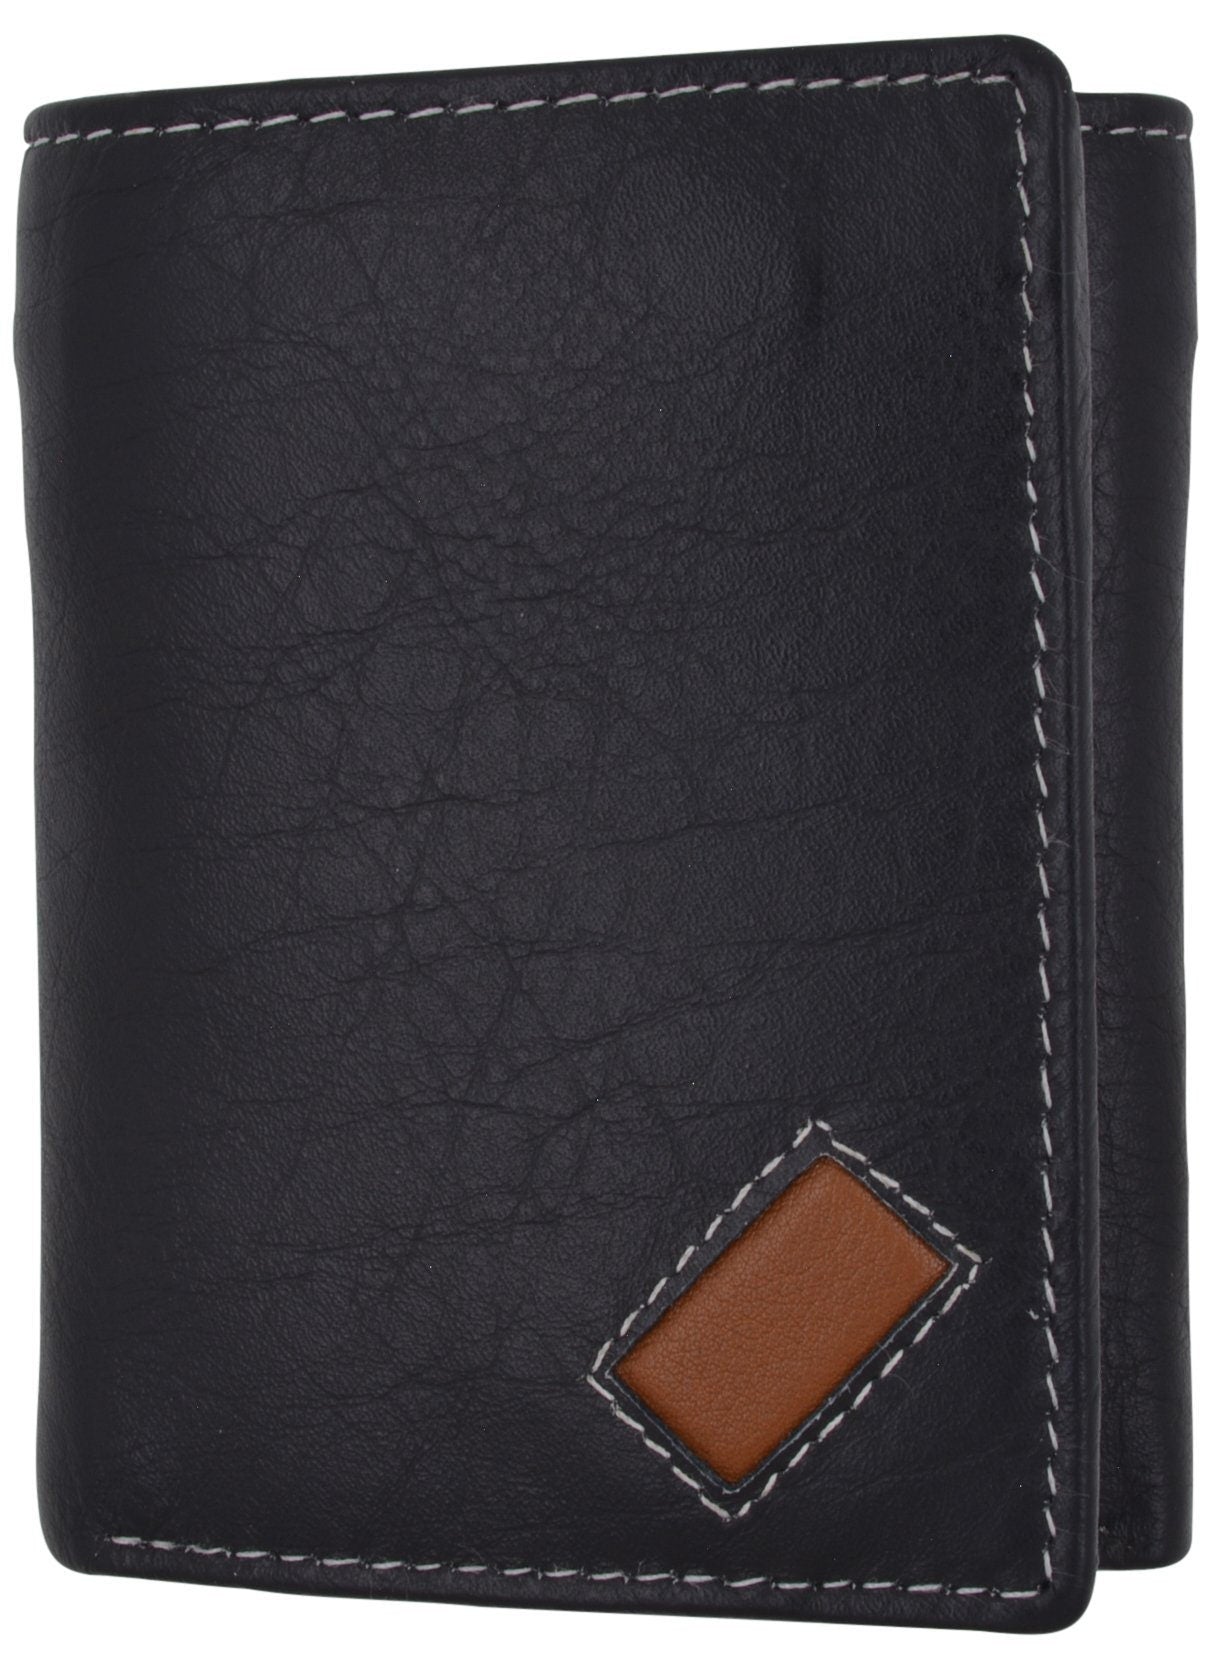 RFID Blocking Handcrafted Cowhide Genuine Leather Men's Trifold Wallet Center Flap Credit Card Wallet